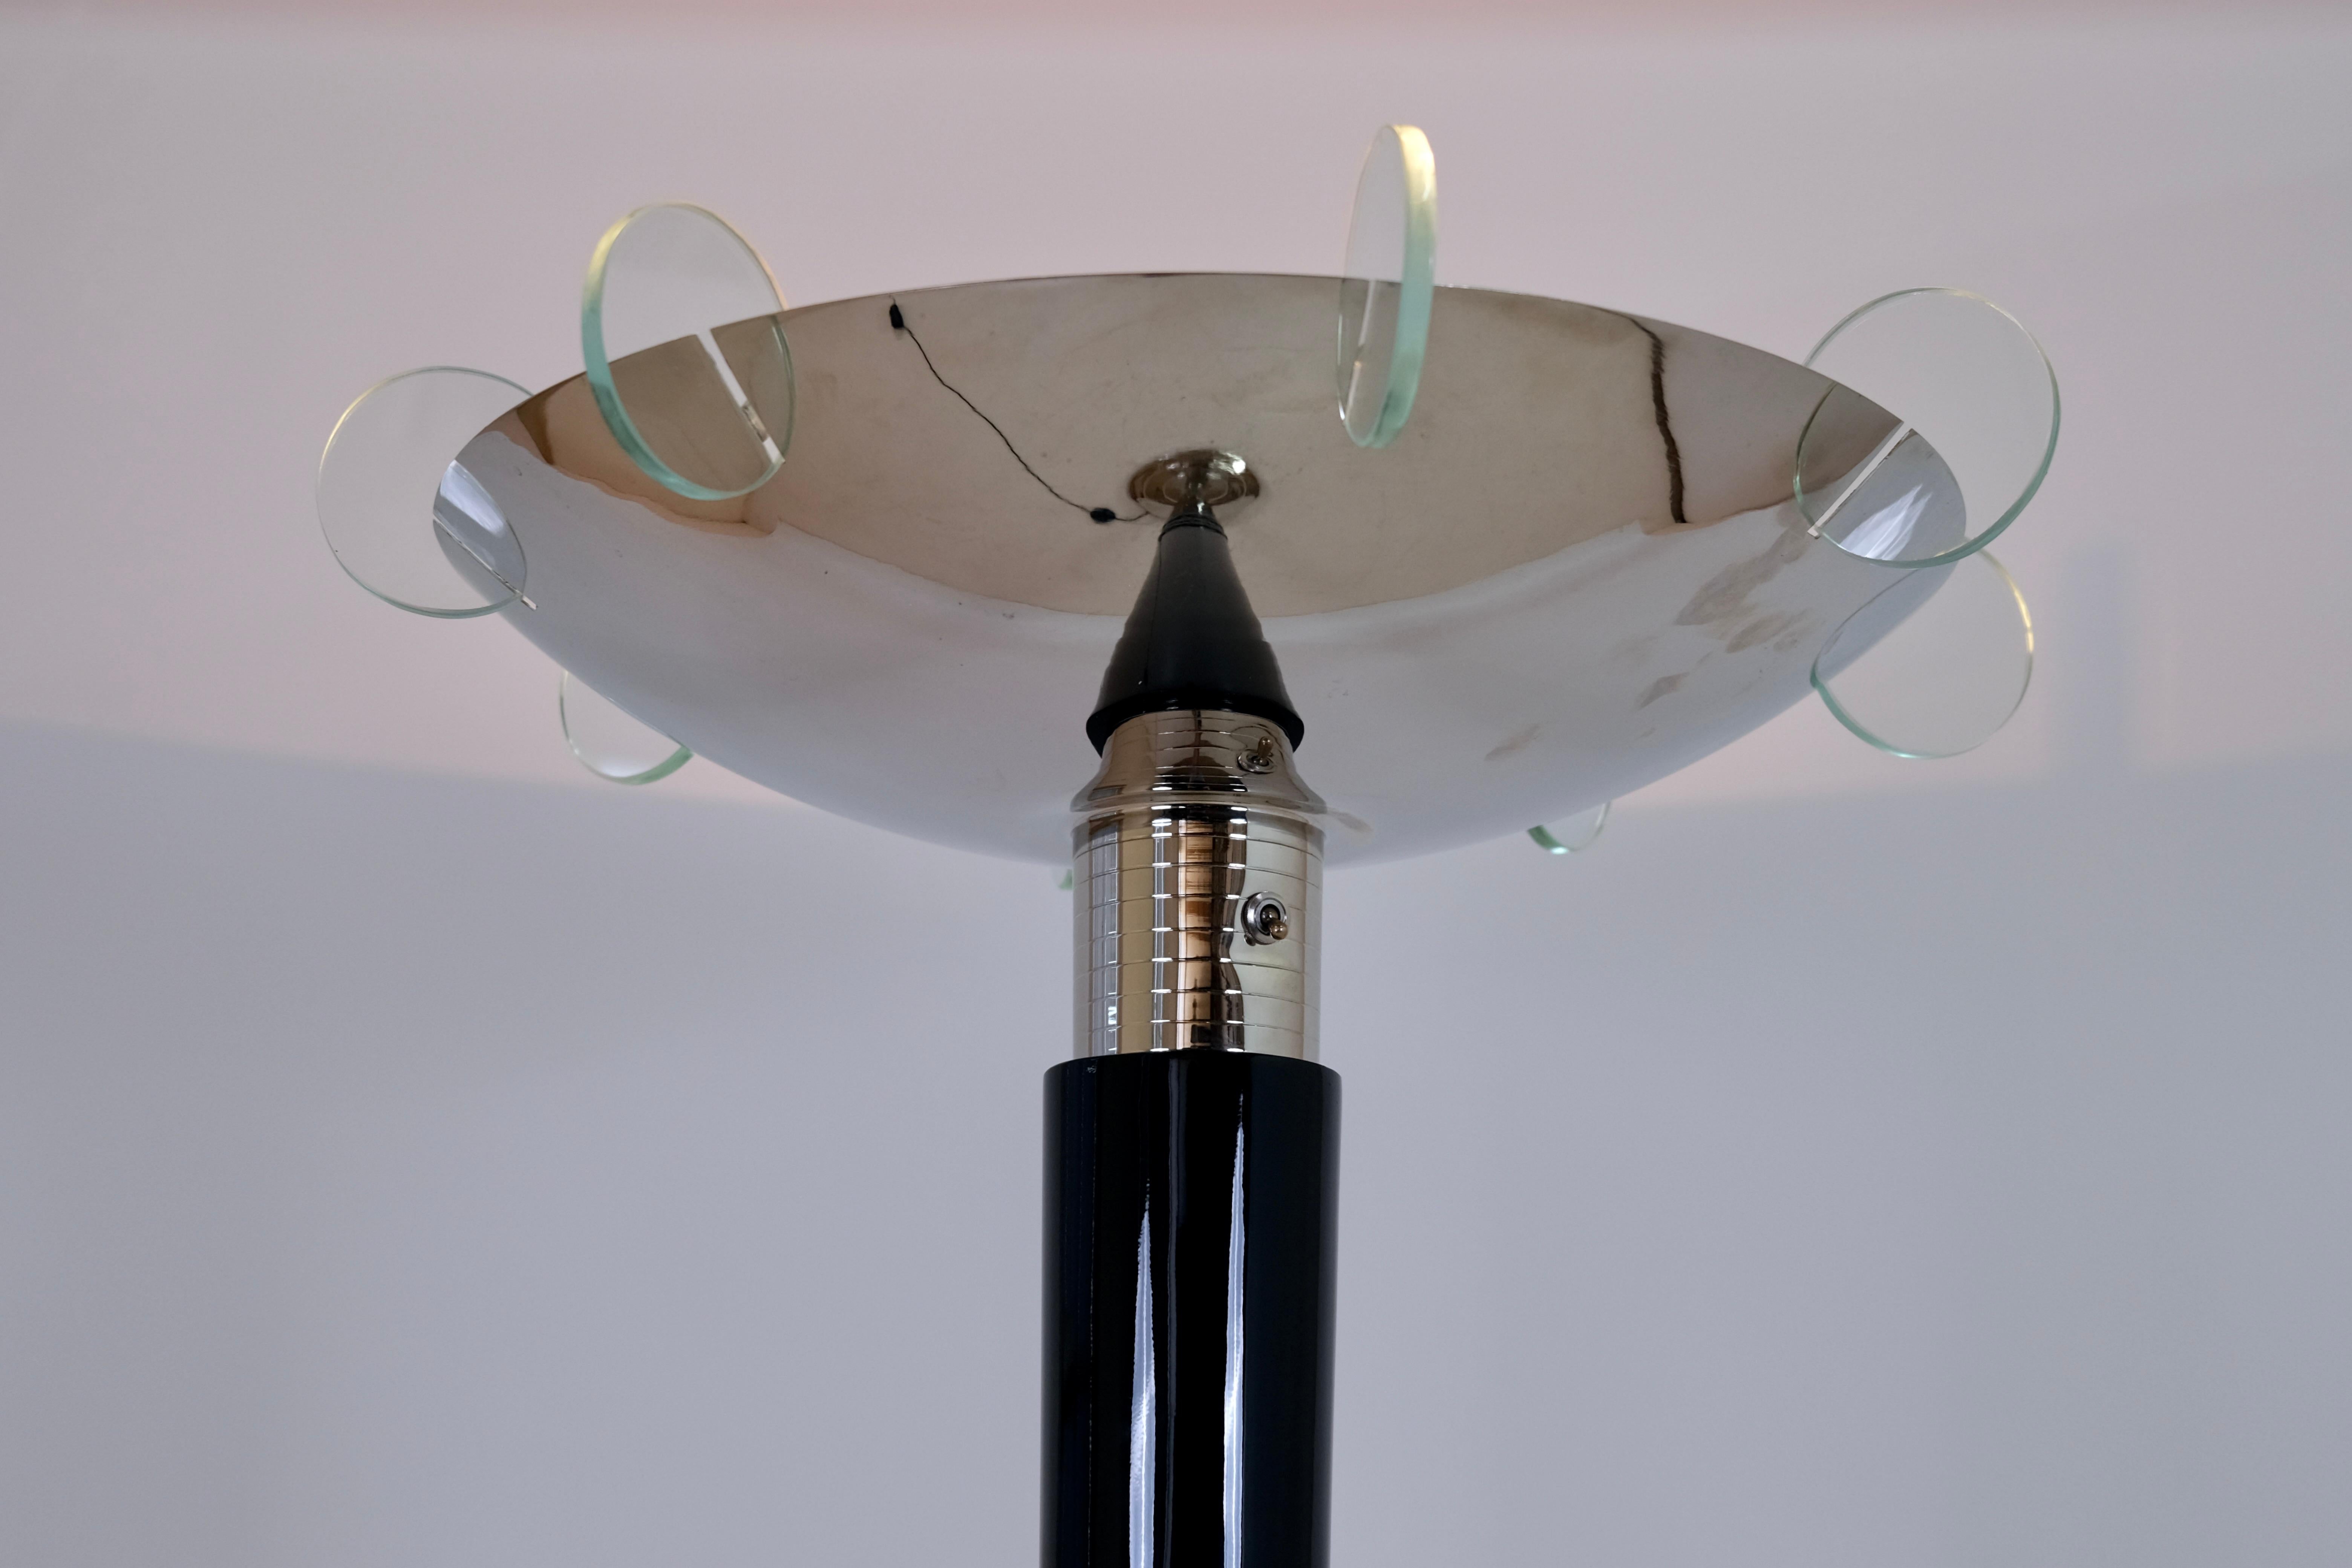 Blackened 1930's French Art Deco Floor Lamp with Black Stem and Nickeled Shade and Base